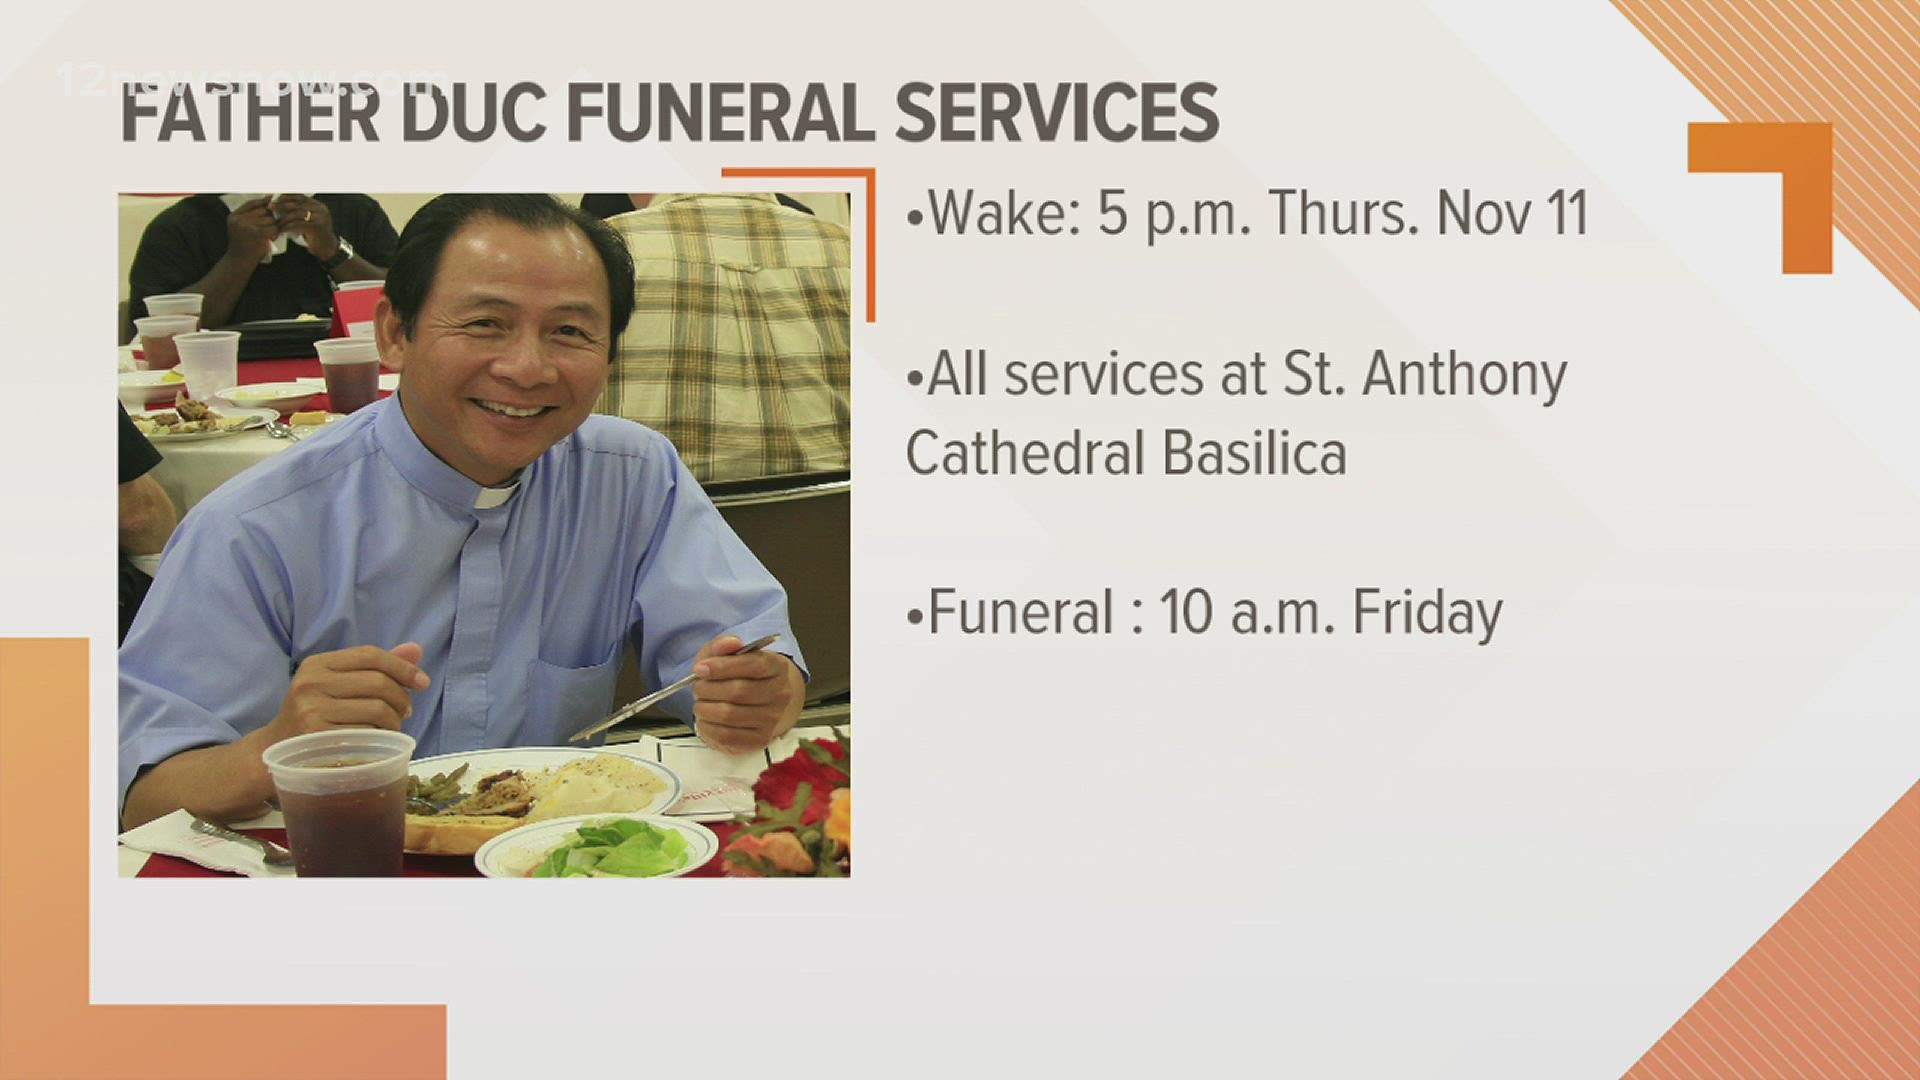 All services will be held at St. Anthony Cathedral Basilica in Beaumont.